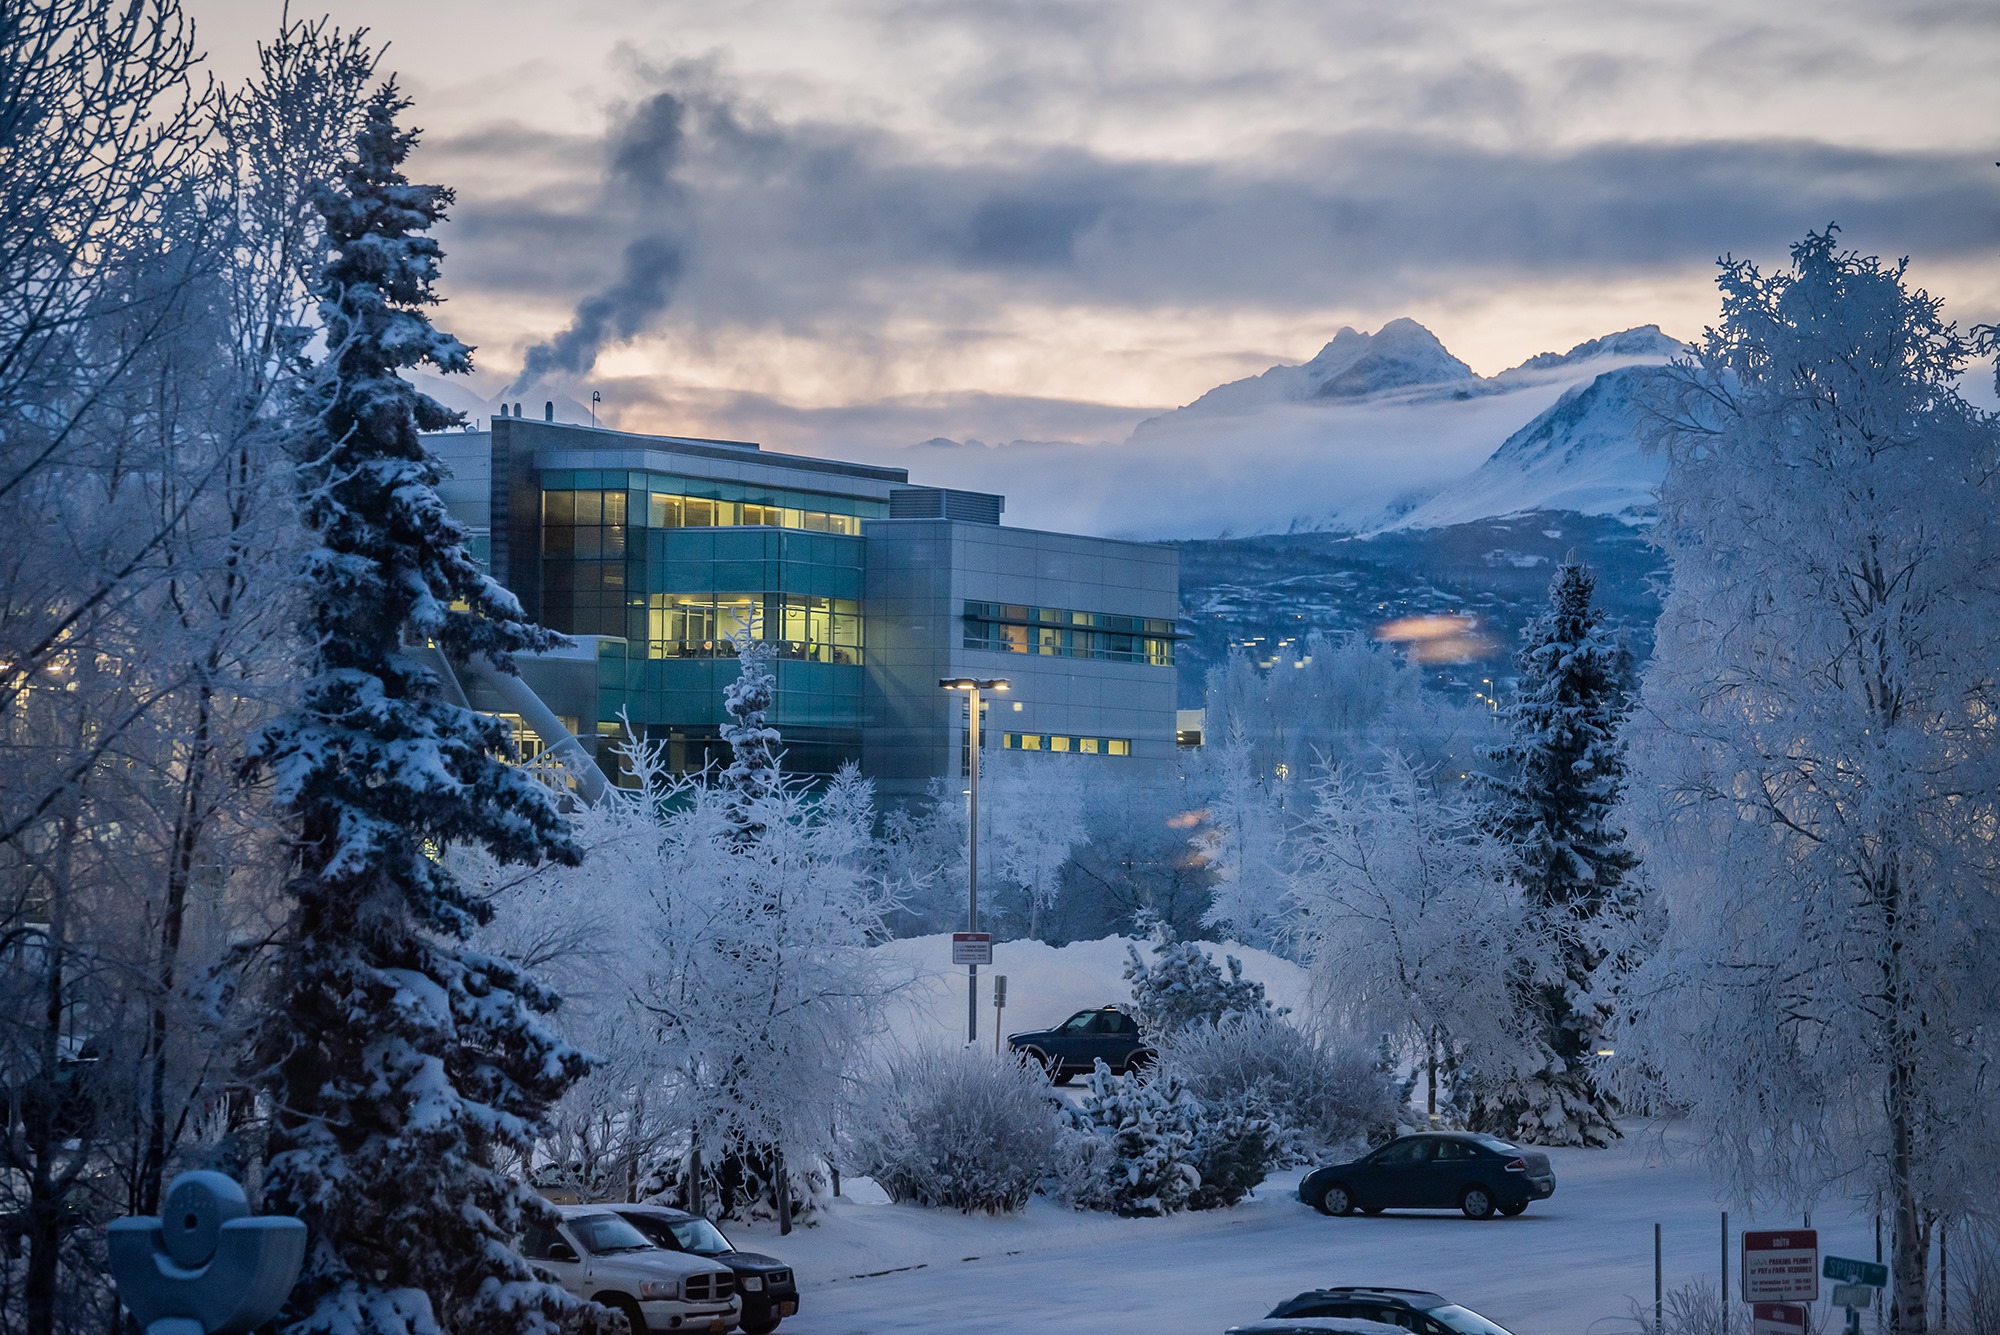 UAA Campus View with Mountains in Background